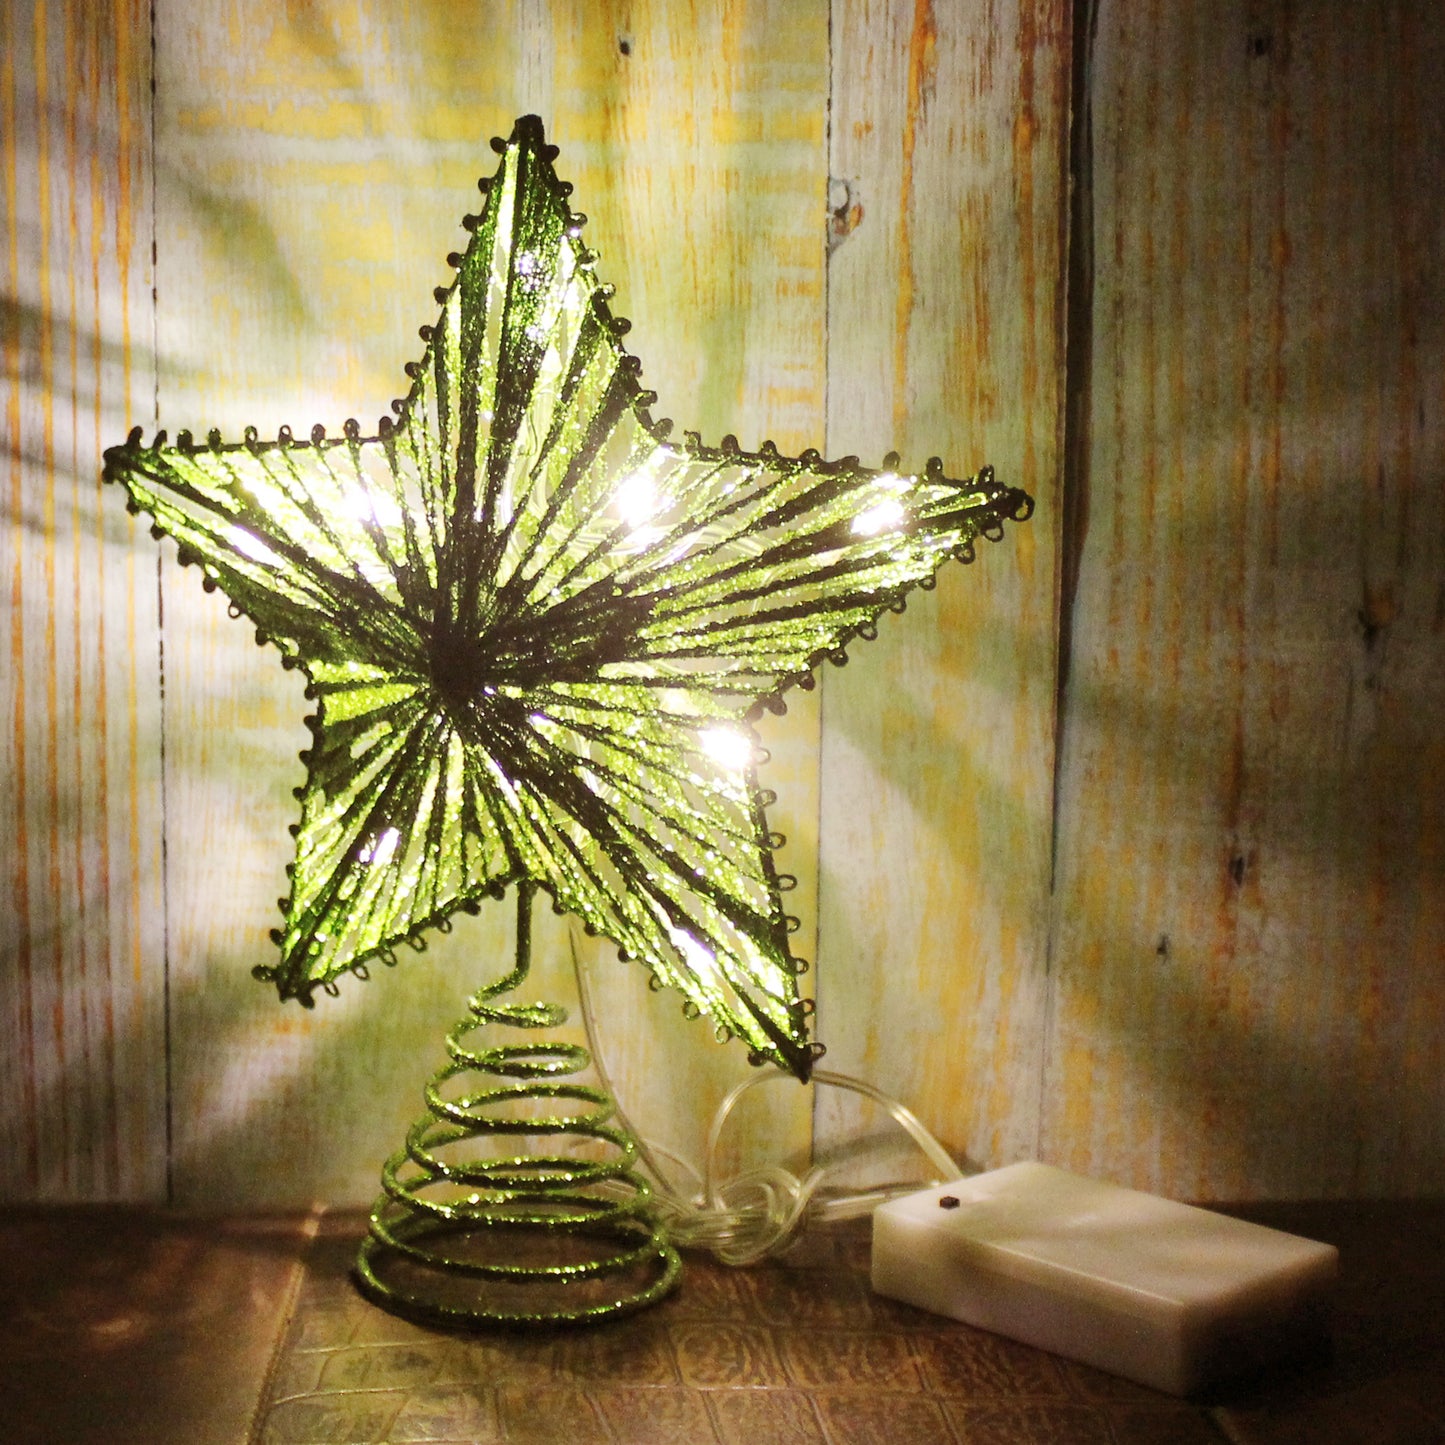 CVHOMEDECO. Green Glittered 3D Tree Top Star with Warm White LED Lights and timer for Christmas Tree Decoration and Holiday Seasonal Décor, 8 x 10 Inch